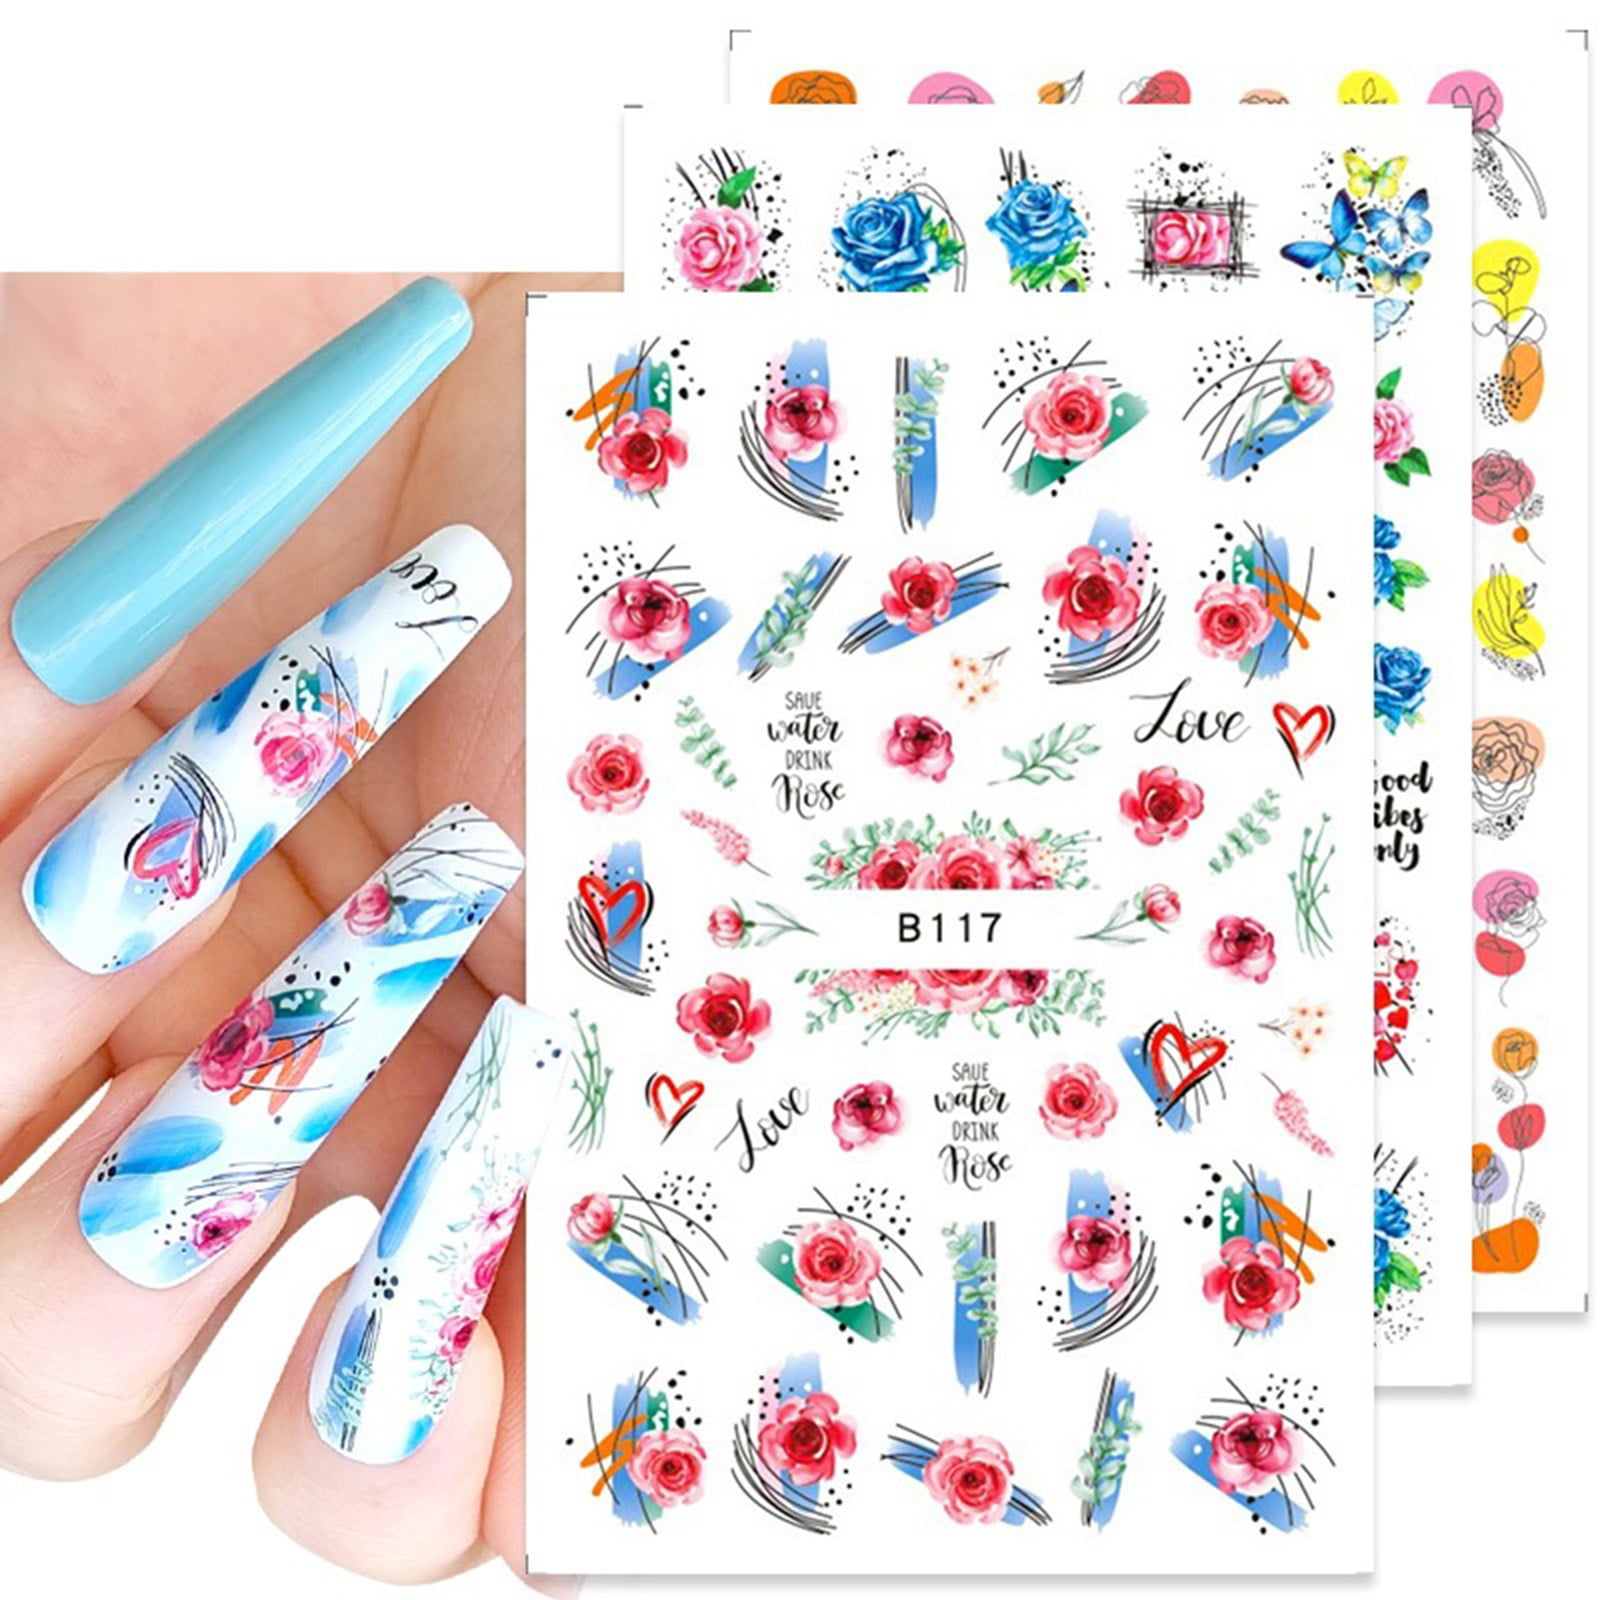 Buy 3D Nail Art Decoration Kits, 24pcs 12 Colors Nail Dried Flowers, 8  Sheet Floral Nail Art Stickers Decals, Curved Tweezers, Polish Pressed Dry Flowers  Water Decal Manicure Design Tools Set (Luck011B)